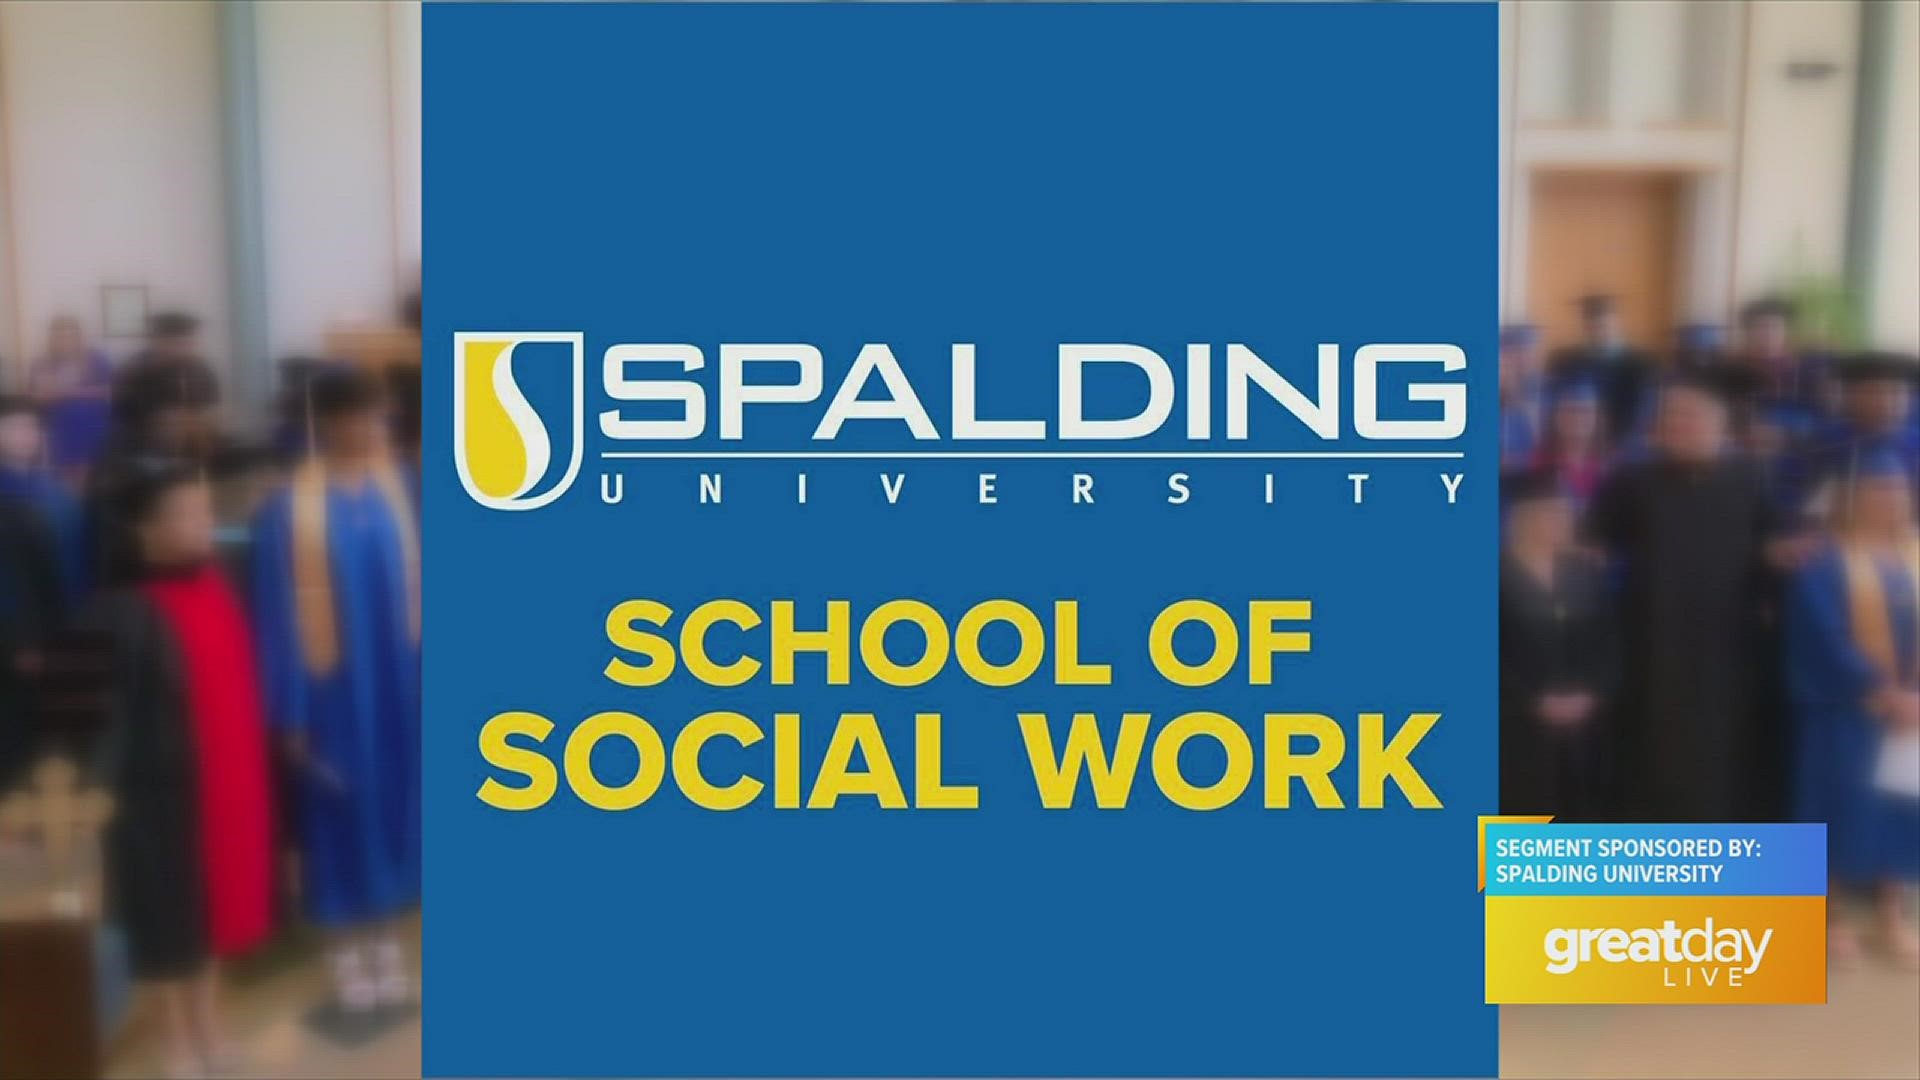 To learn more about Spalding University's School of Social Work, visit Spalding.edu.